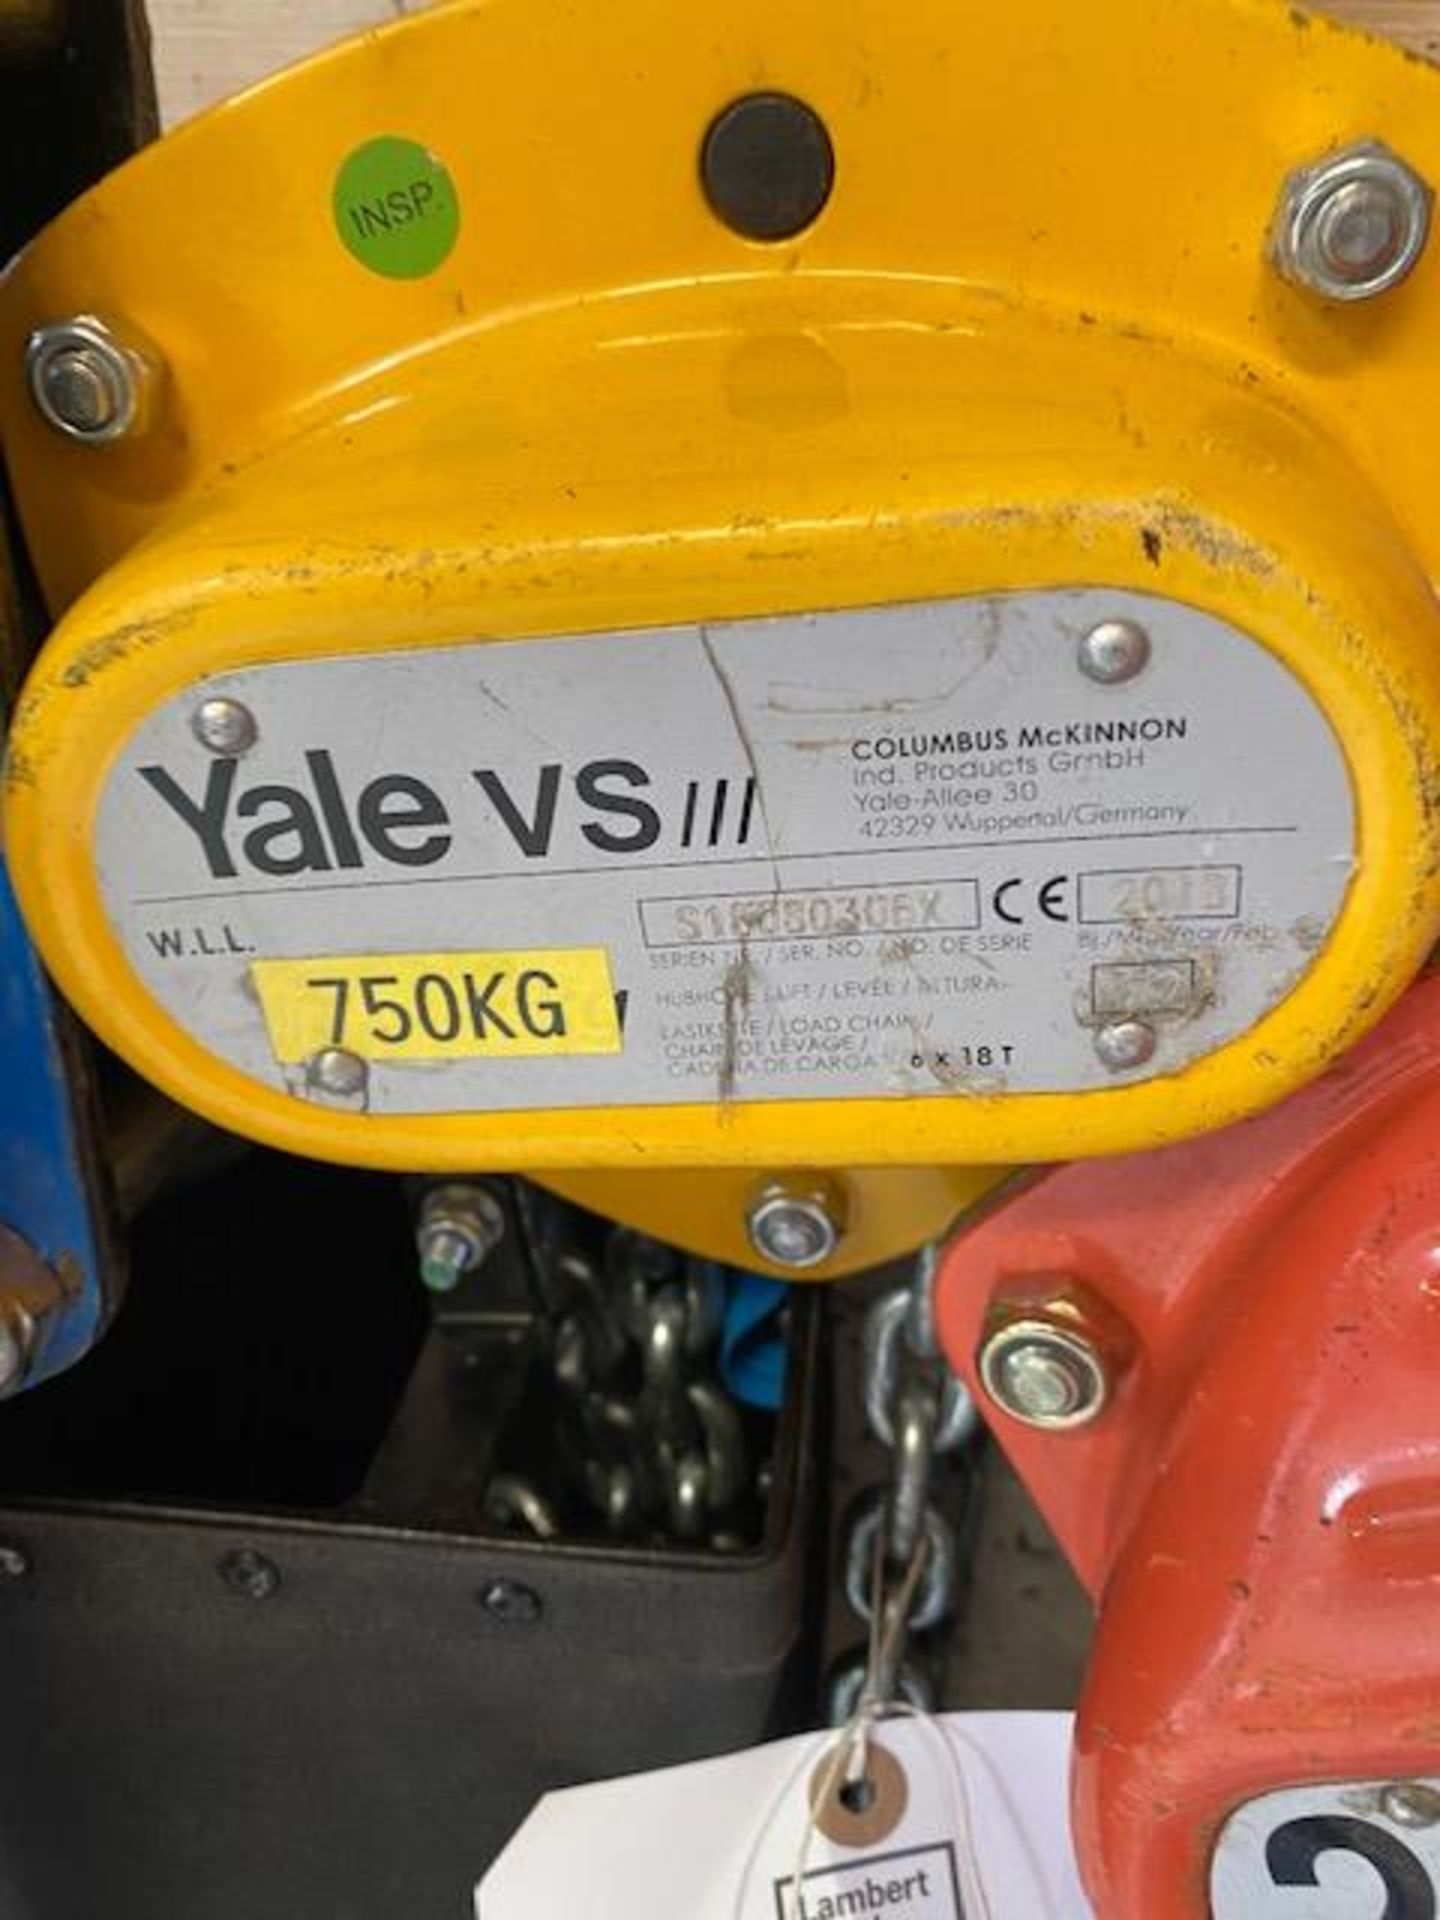 Yale V5 750Kg chain hoist s/n 518080306X (2018). *N.B. This lot has no record of Thorough - Image 2 of 2